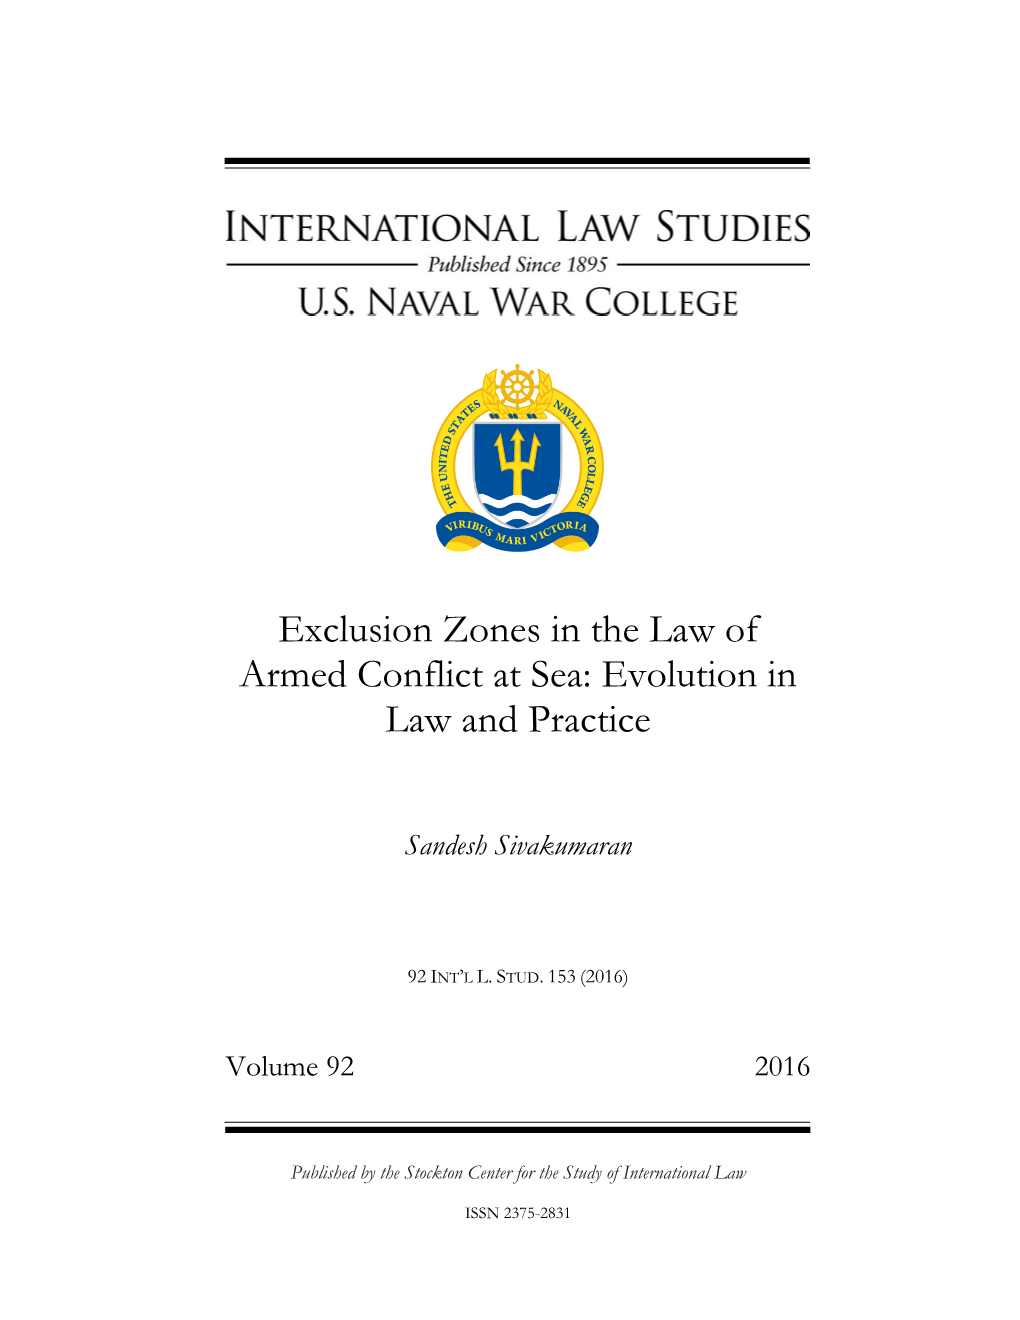 Exclusion Zones in the Law of Armed Conflict at Sea: Evolution in Law and Practice